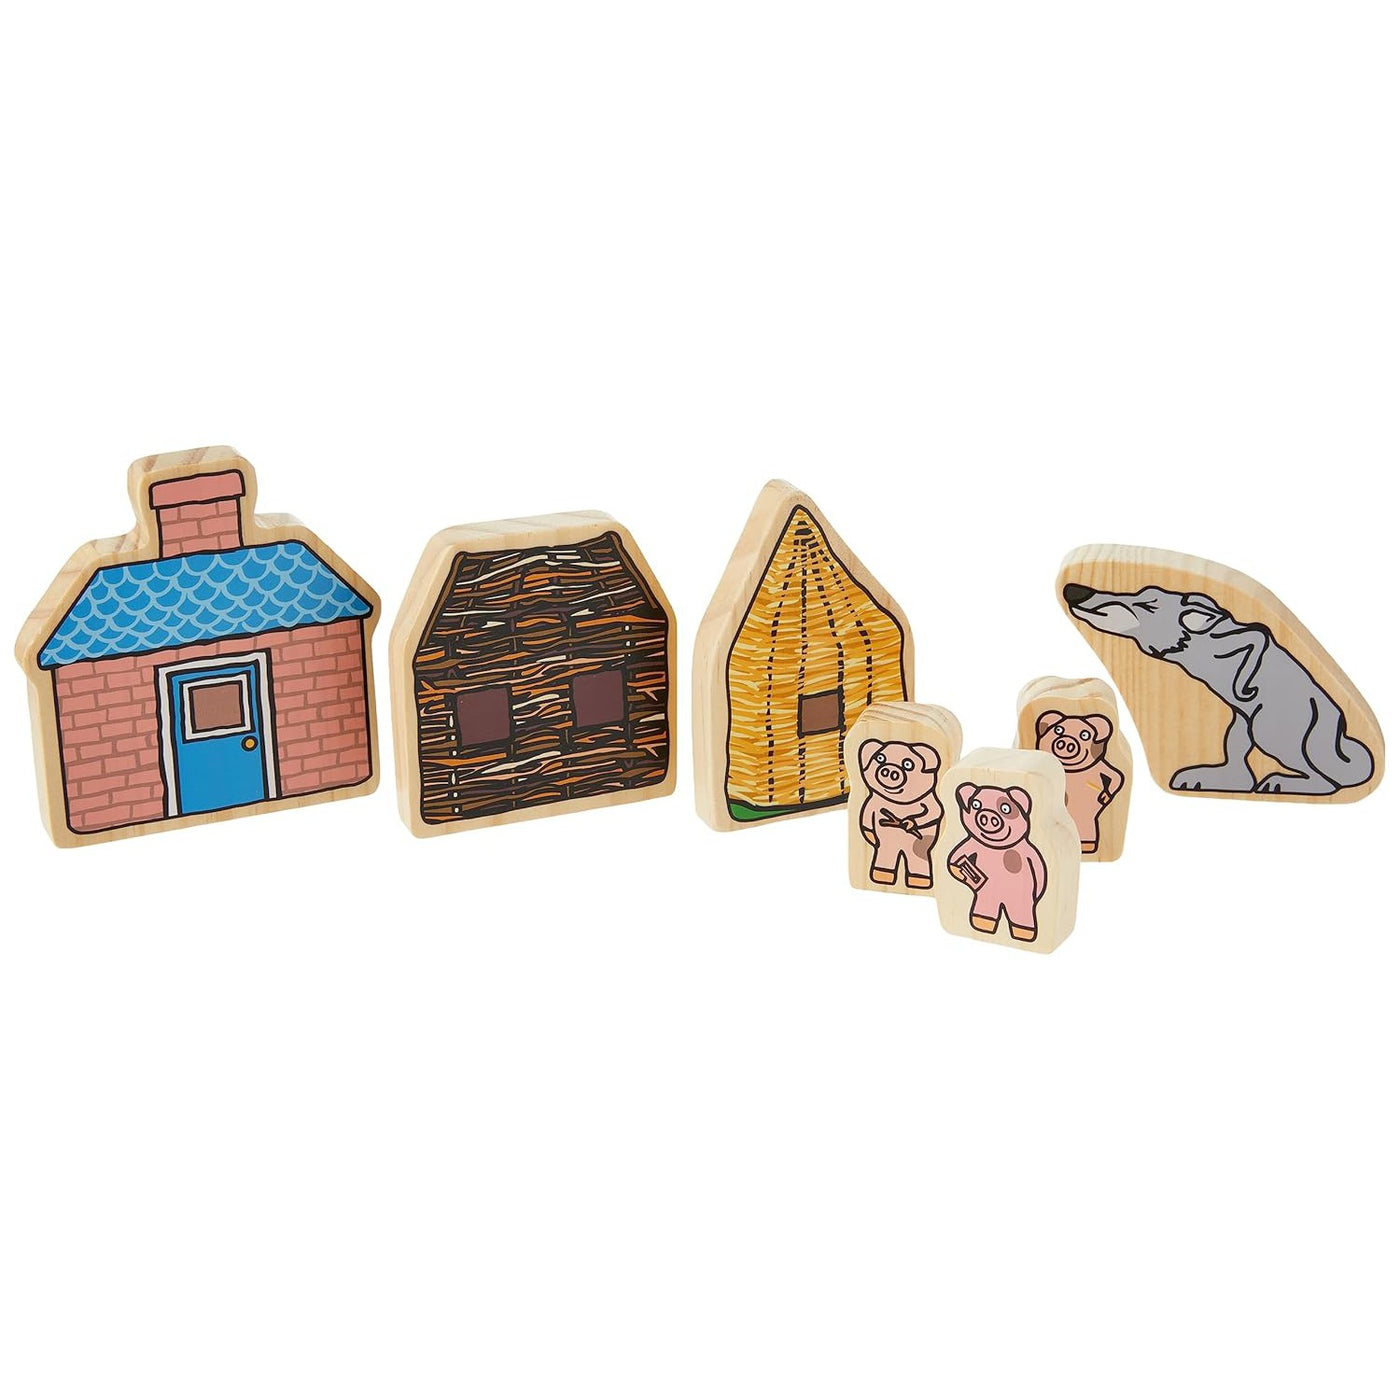 Three Little Pigs Wooden Characters